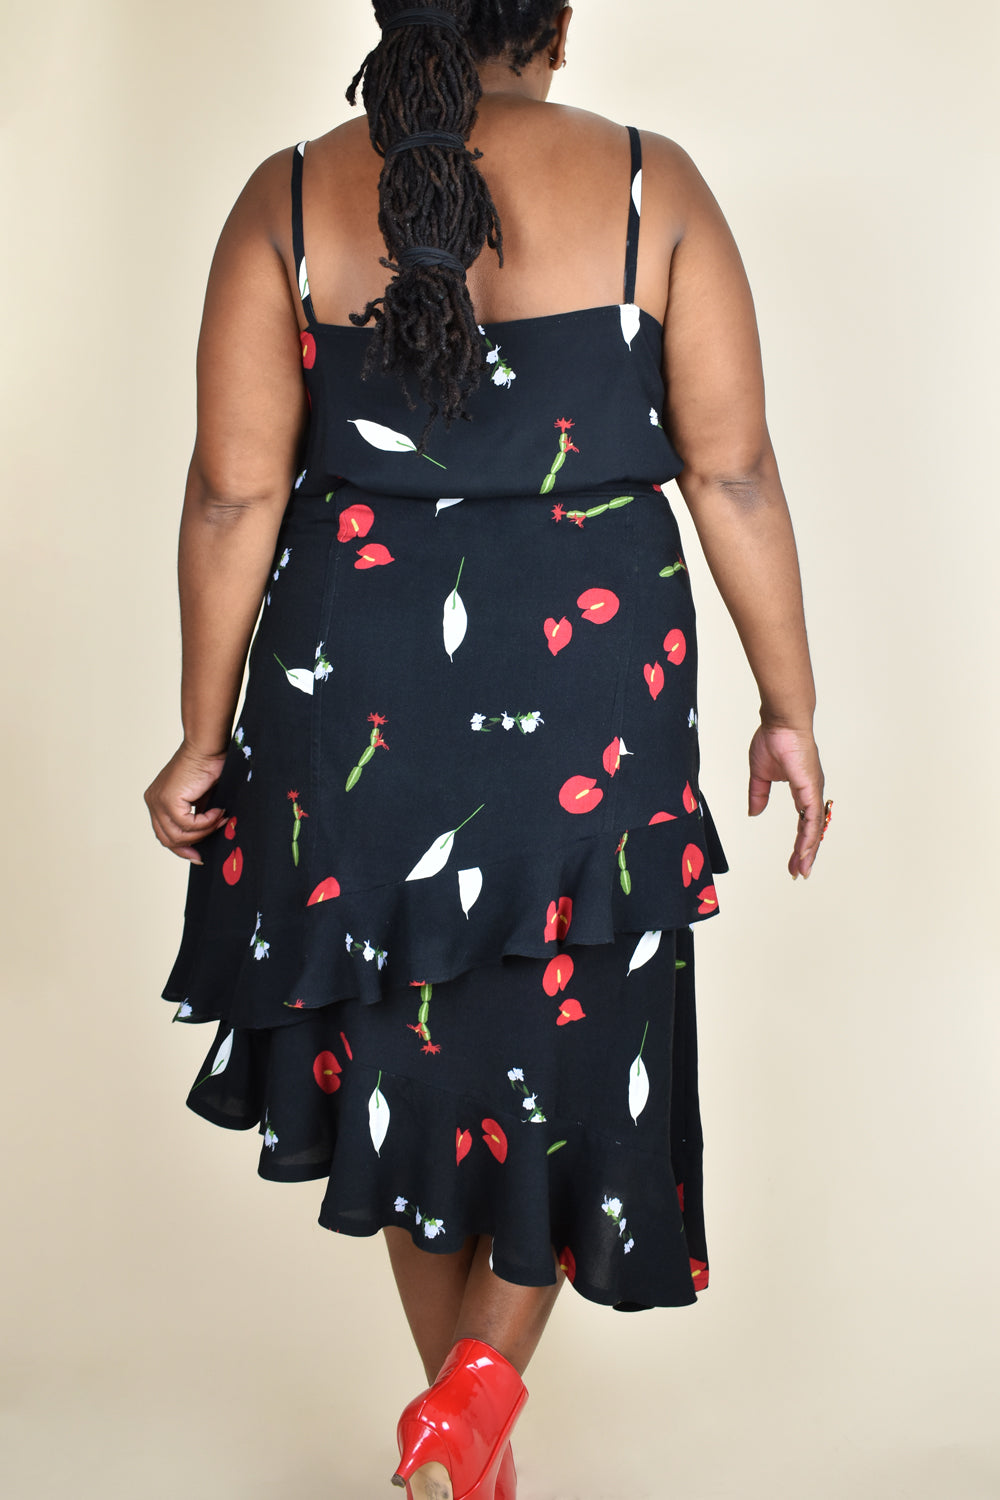 Gone Rogue Skirt sewing pattern by Forest and Thread